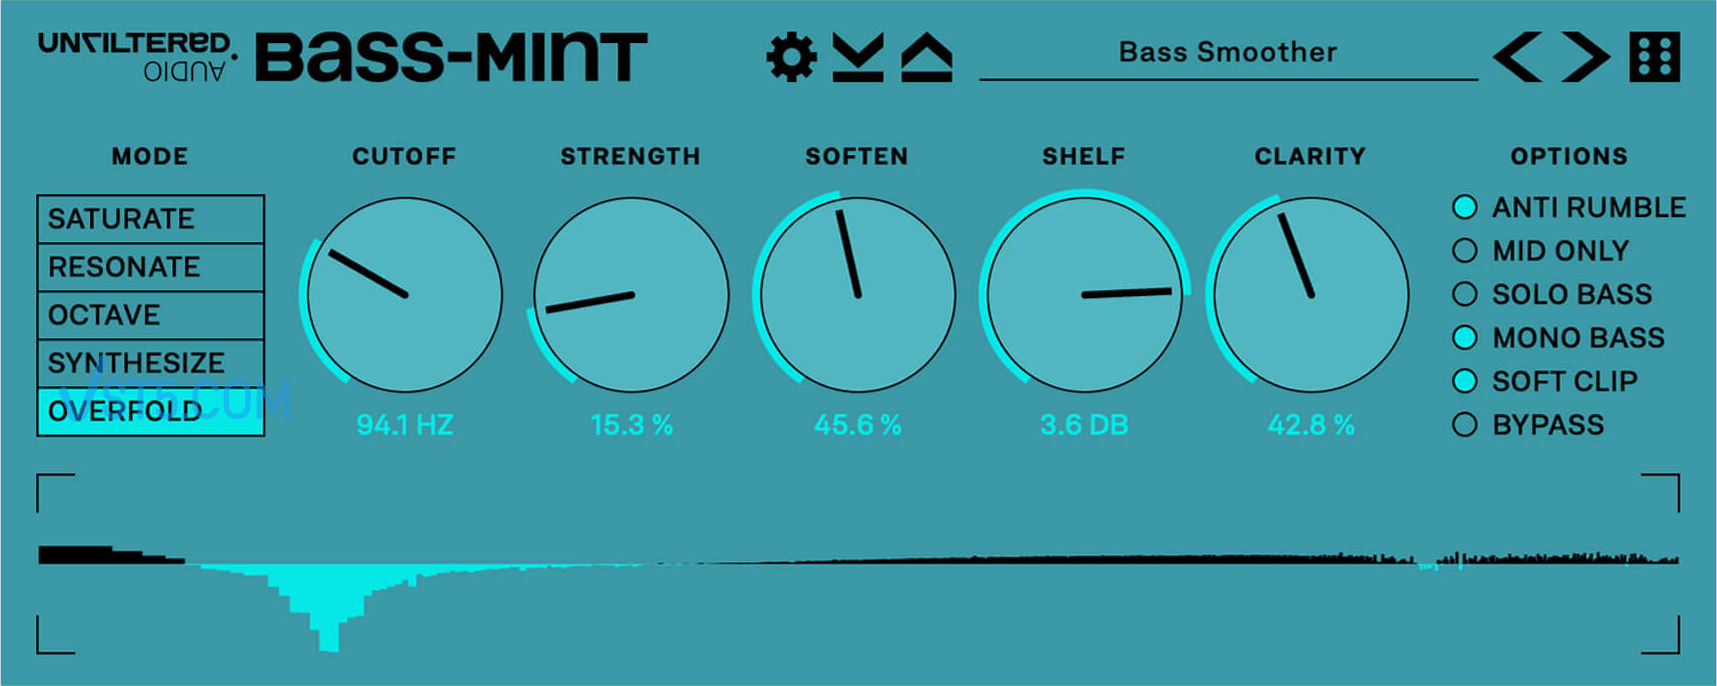 Unfiltered Audio Bass Mint v1.0.0 Incl Patched and Keygen-R2R 低频增强工具-VST5-娱乐音频资源分享平台